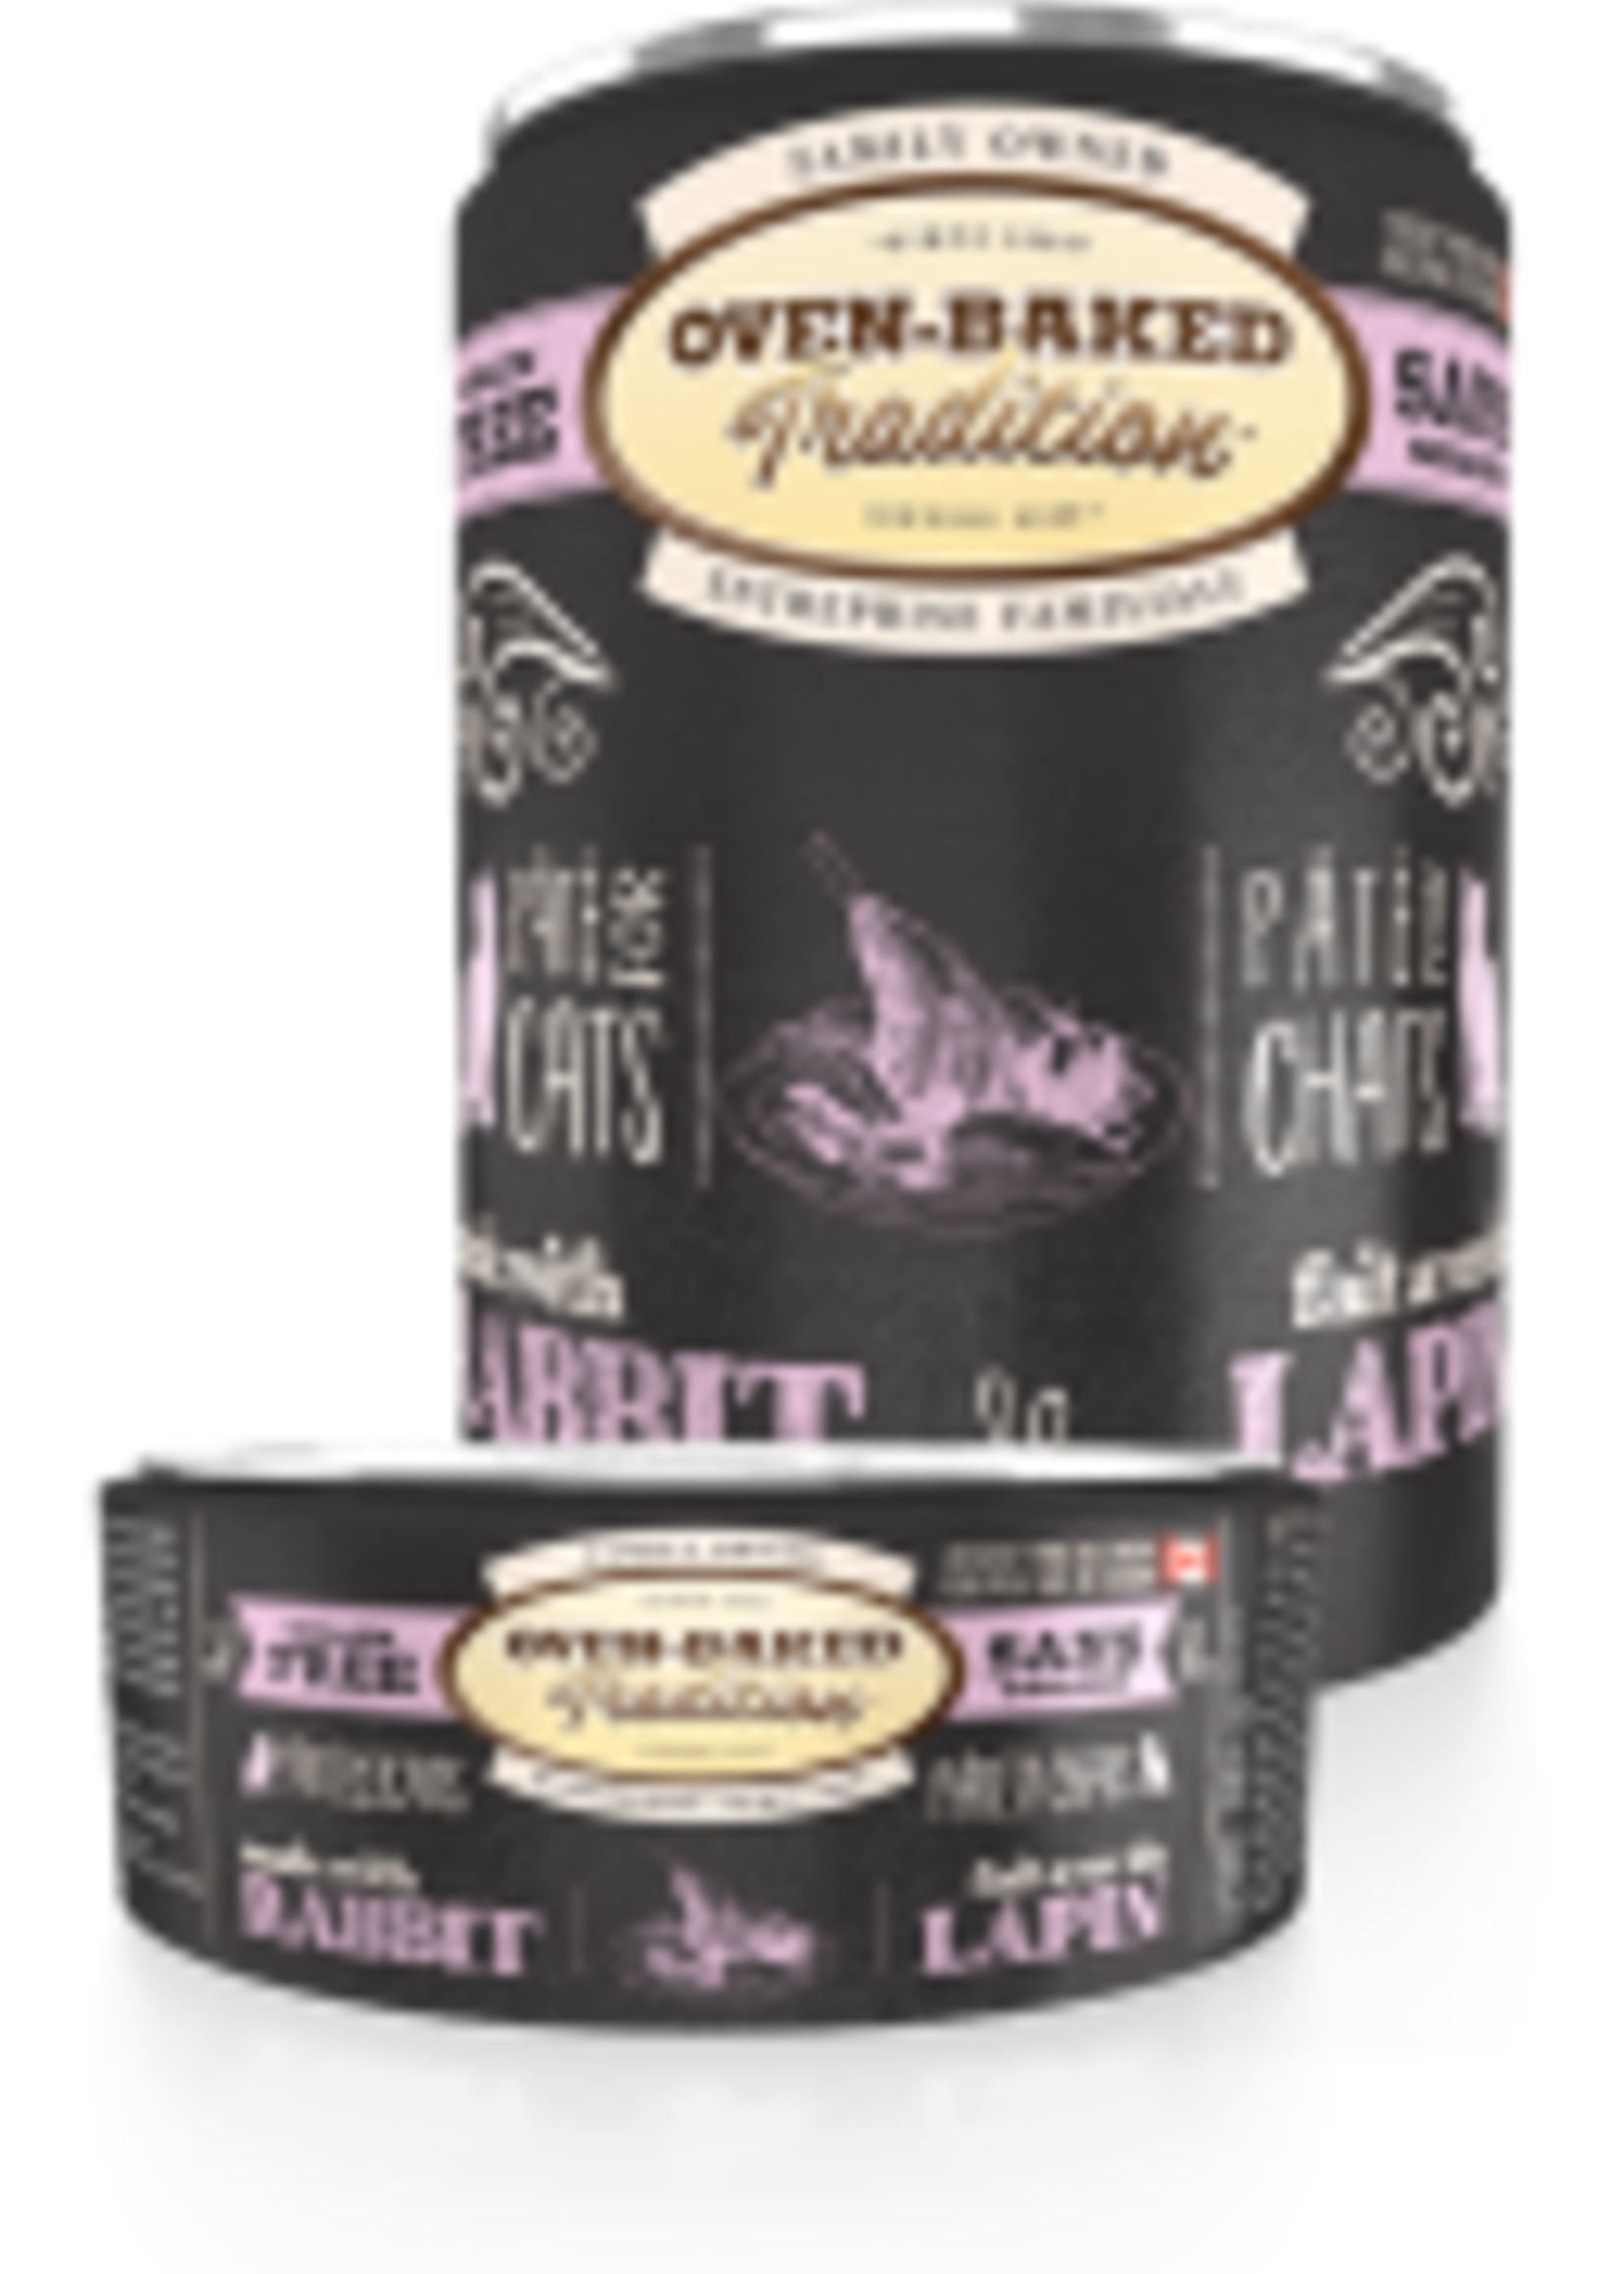 Ovenbaked Tradition Oven-Baked Tradition Cat GF Rabbit 5.5oz